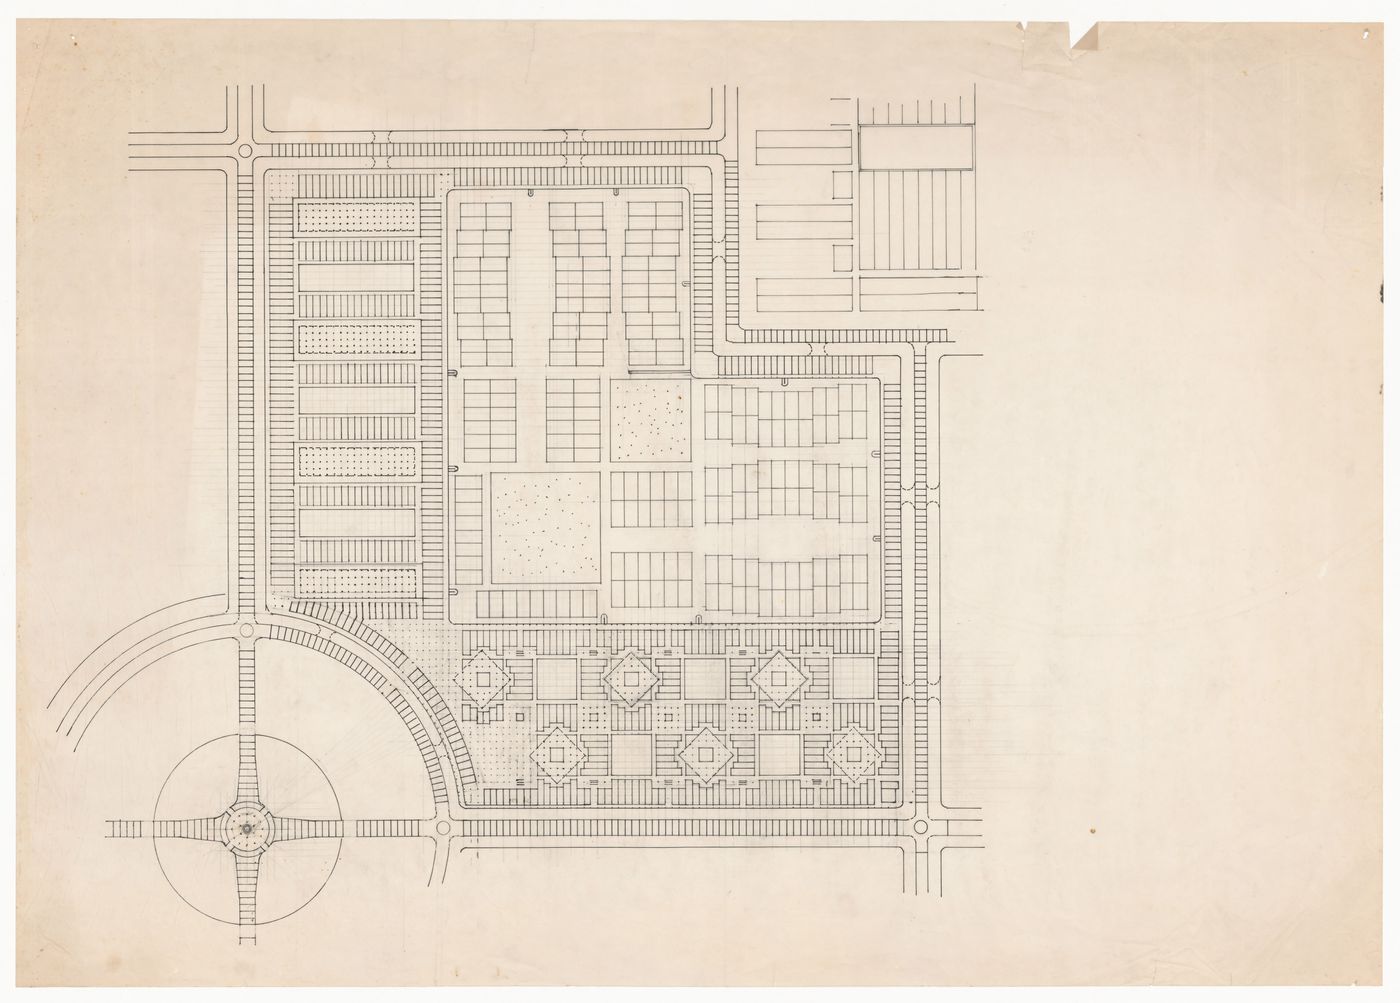 Plan for Linear city, Chandigarh, India